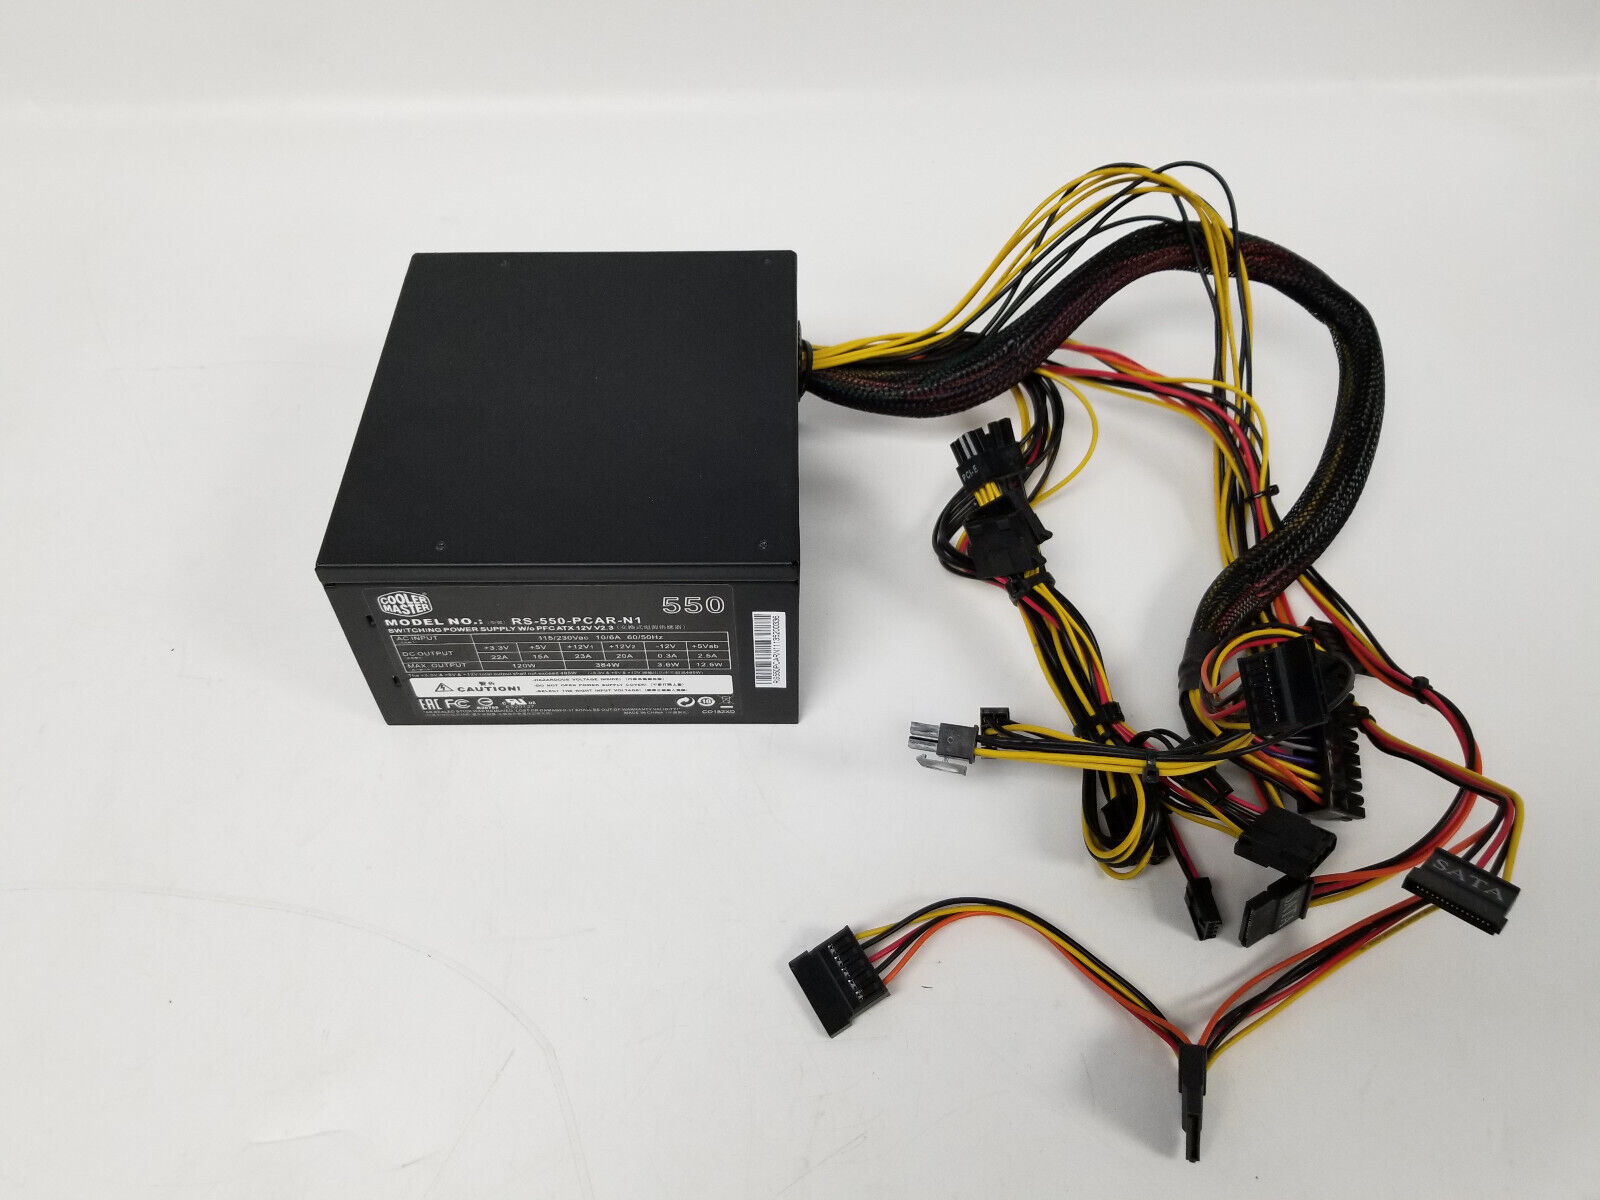 Cooler Master RS-550-PCAR-N1 Power Supply 550W